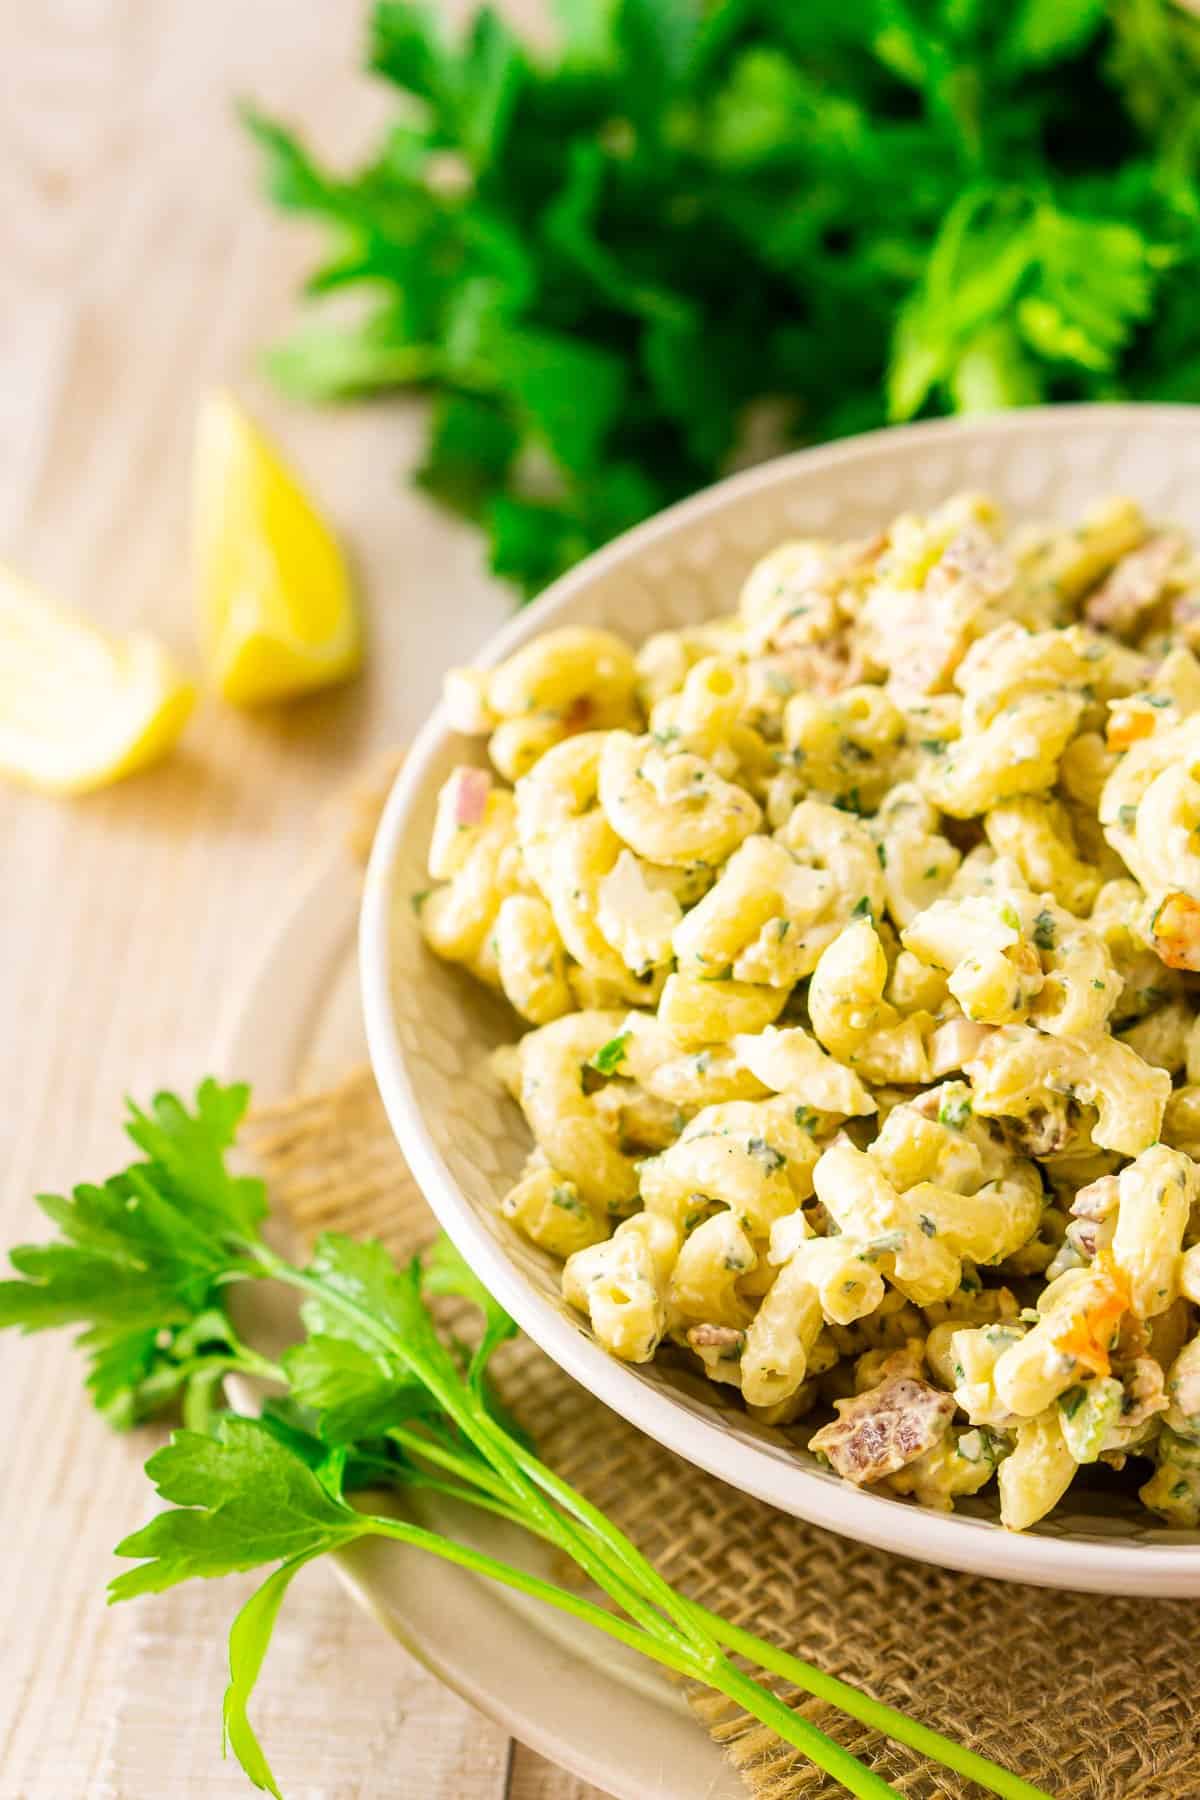 A bowl of herbed bacon macaroni salad with fresh parsley and lemon slices on the side.